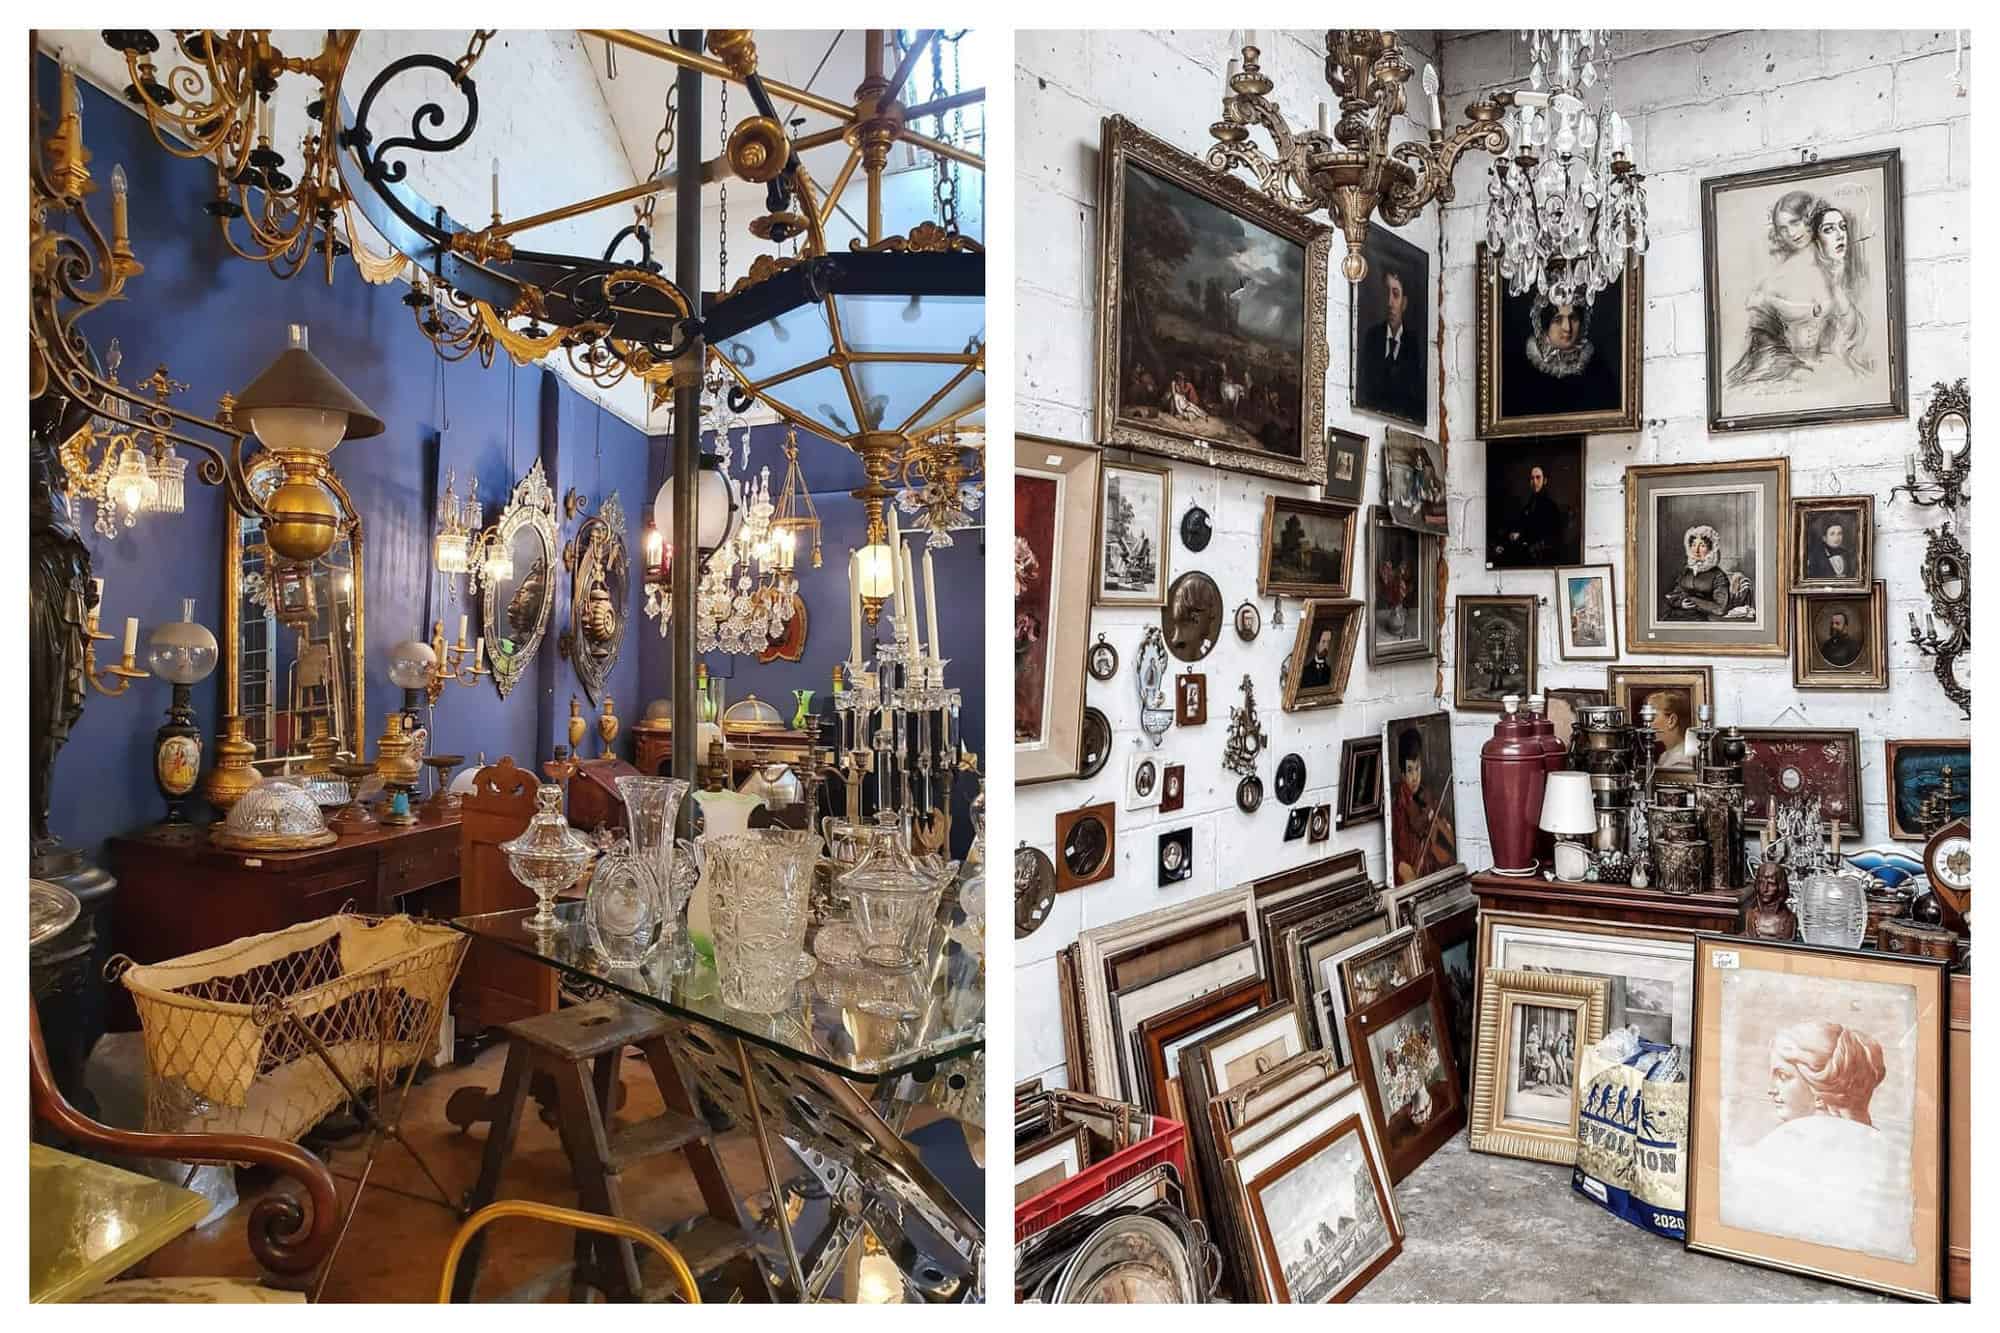 Left: A photo of many antiques at a shop in Les Puces, including chandeliers, glass ornaments, mirrors and more. Right: A photos of renaissance style paintings on a white wall in a shop at Les Puces.